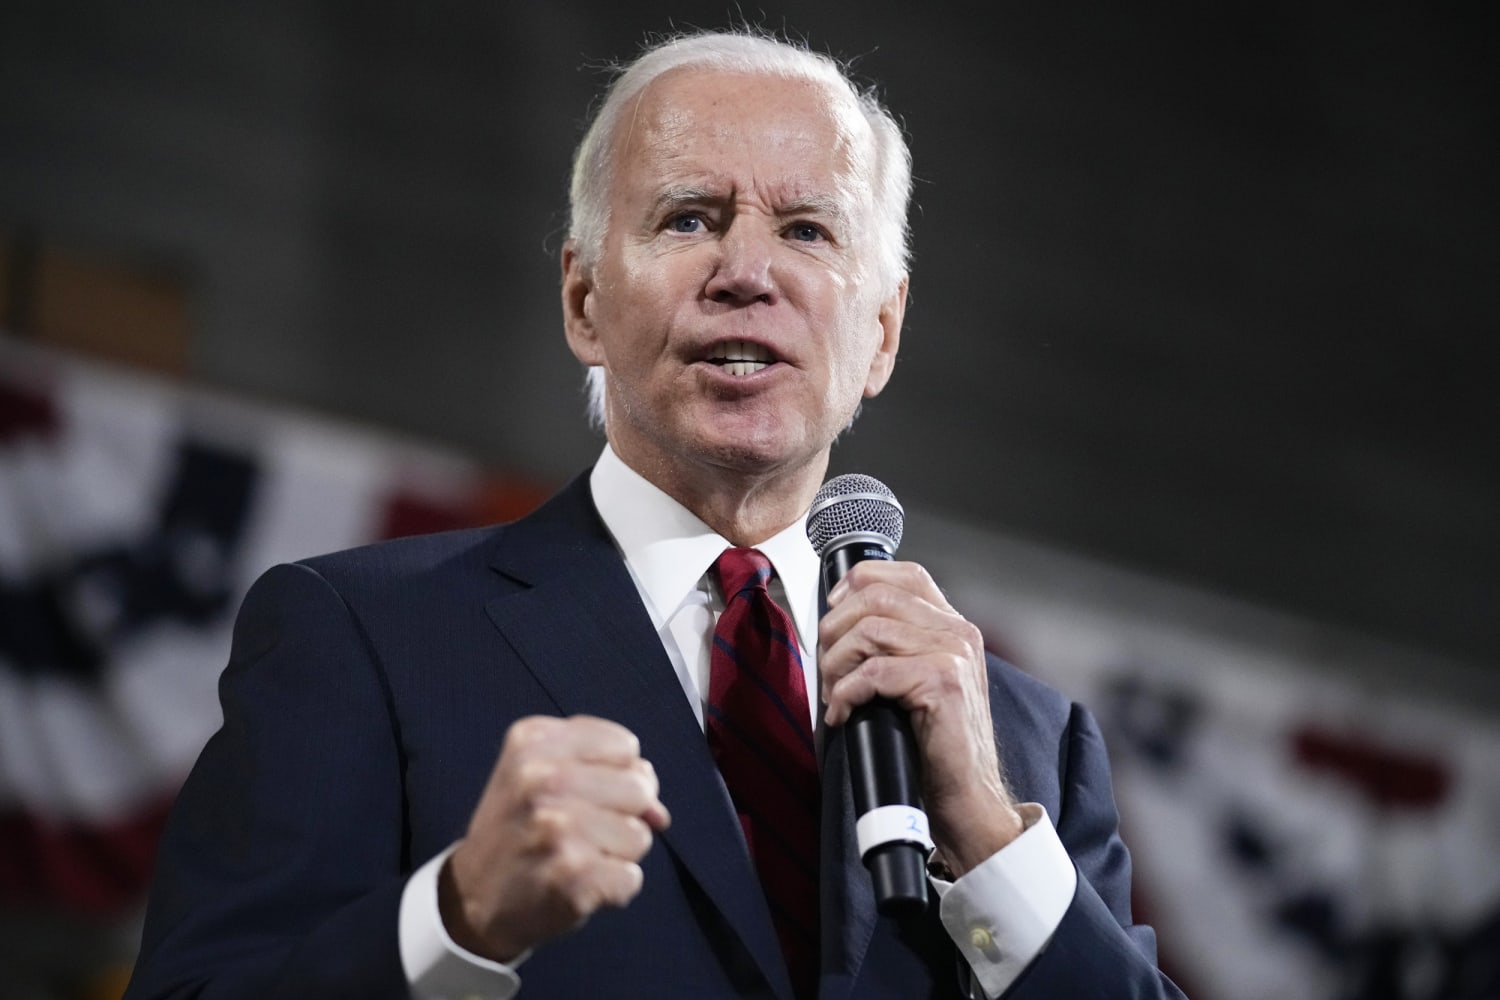 Never again: How a 'lesson of 2011' shaped Biden's no-negotiation stance on debt limit